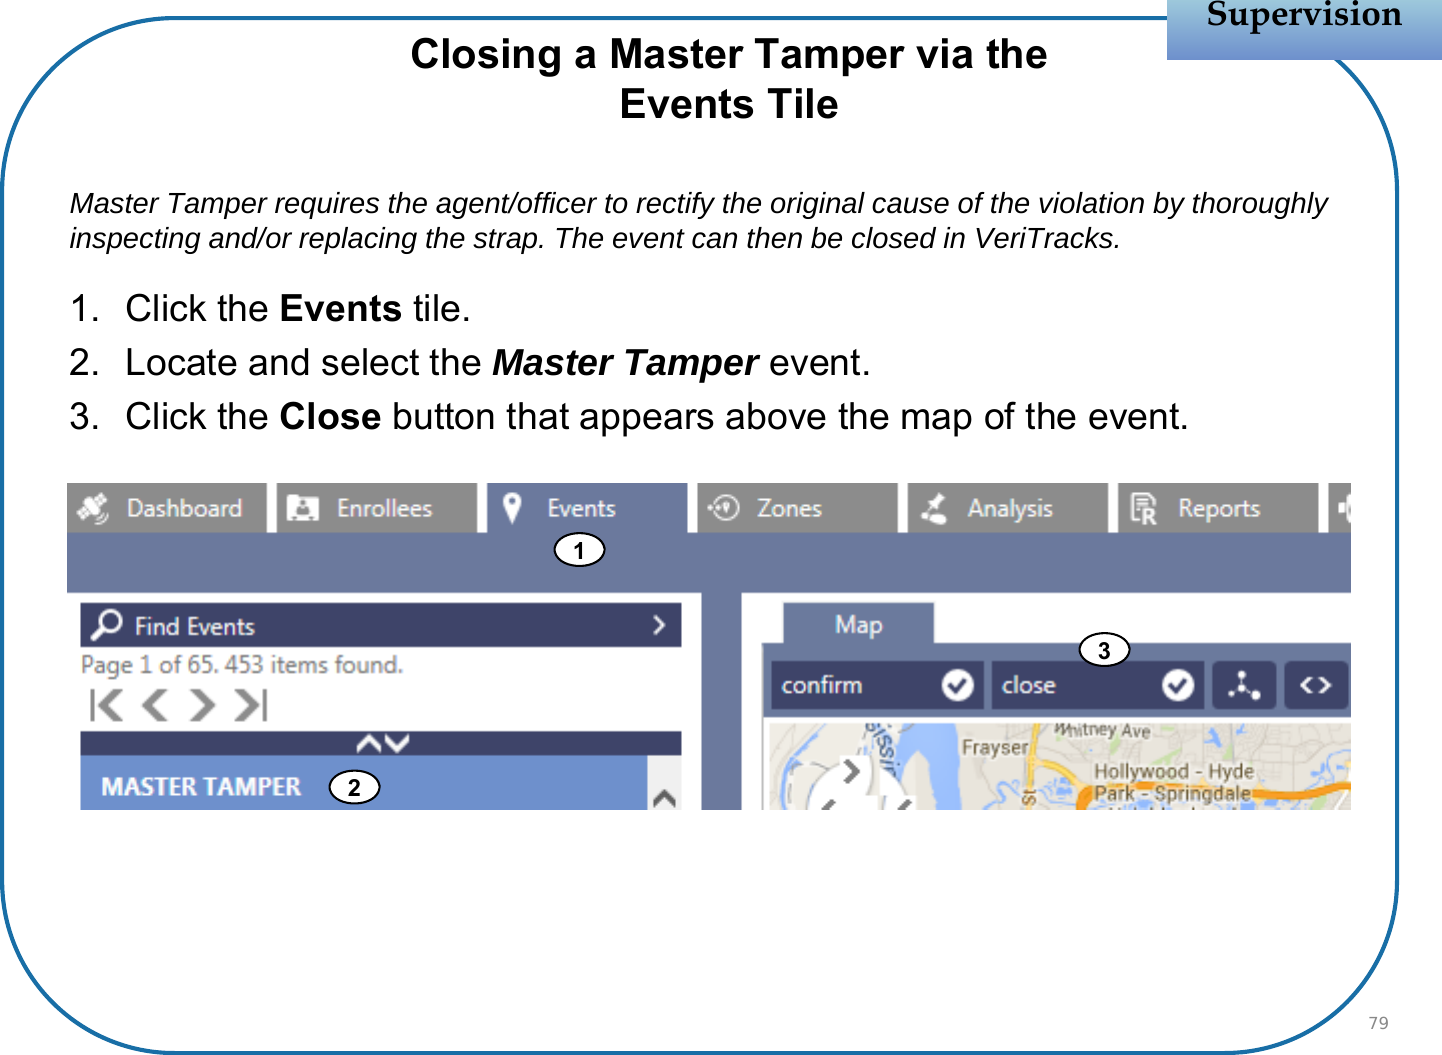 Closing a Master Tamper via theEvents TileMaster Tamper requires the agent/officer to rectify the original cause of the violation by thoroughly inspecting and/or replacing the strap. The event can then be closed in VeriTracks. 1. Click the Events tile.2. Locate and select the Master Tamper event.3. Click the Close button that appears above the map of the event.SupervisionSupervision79123